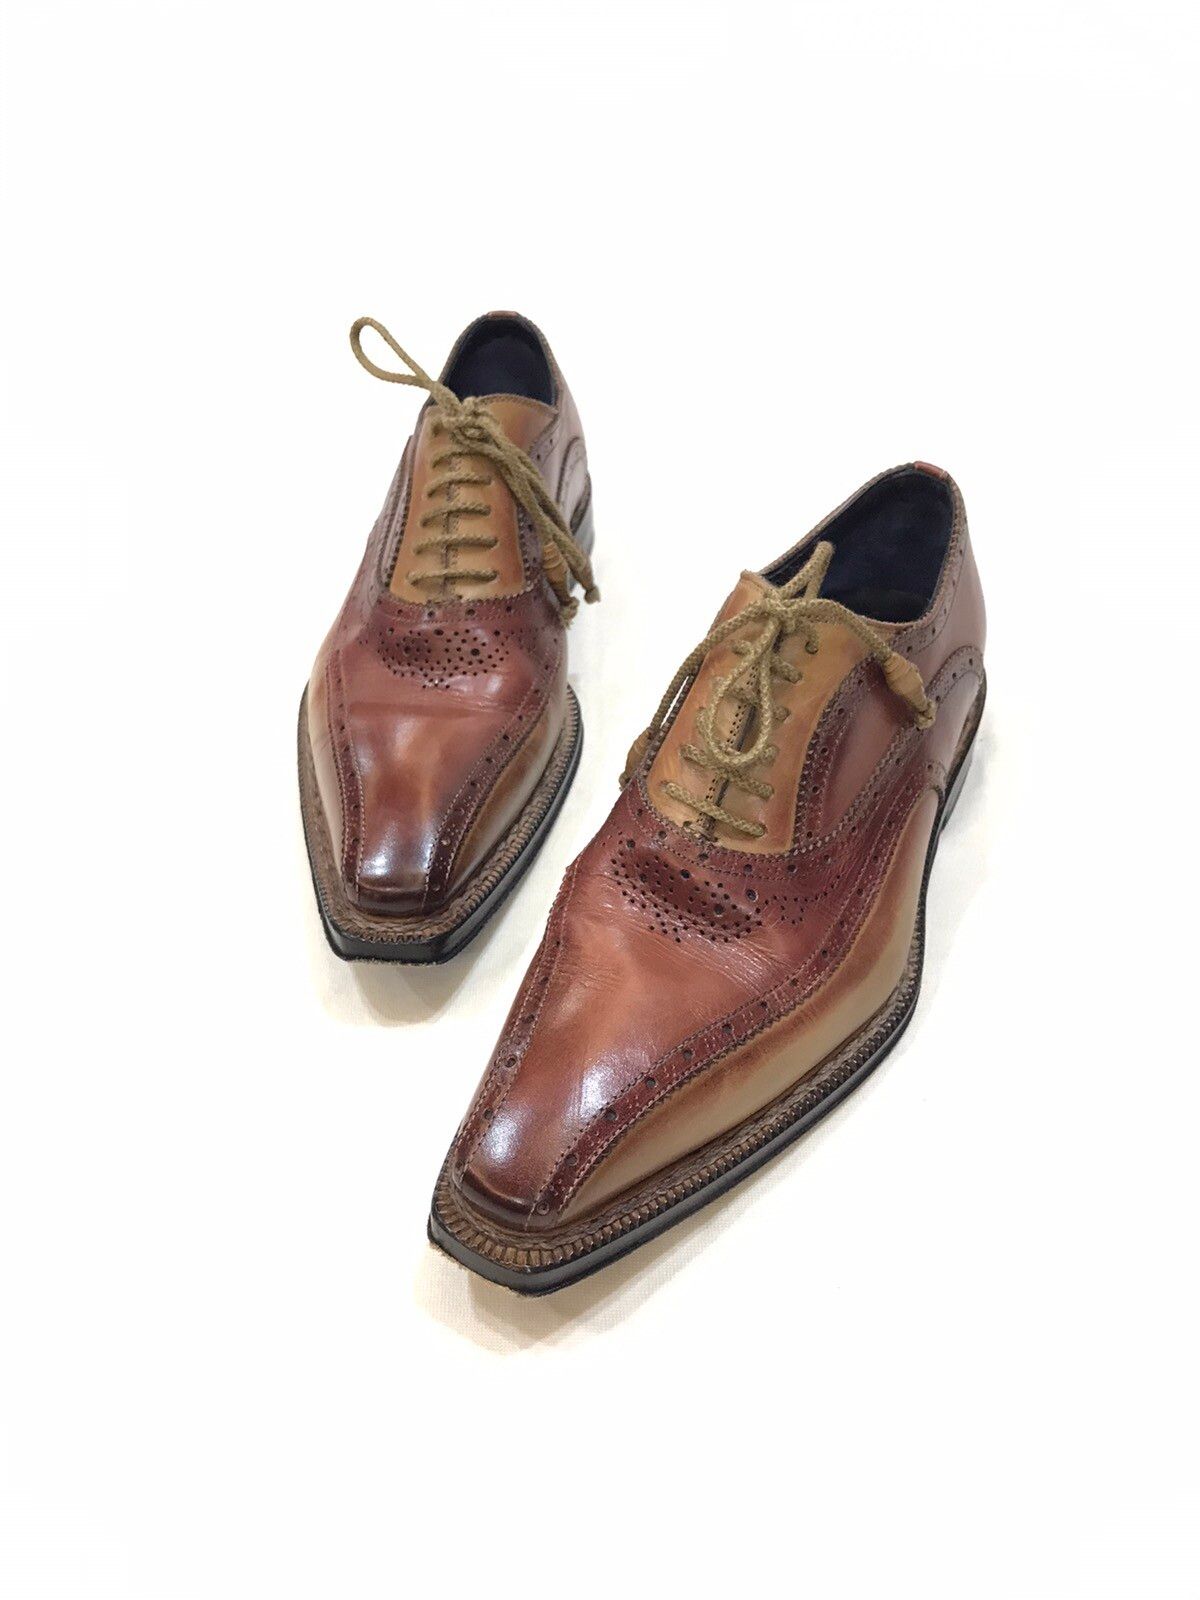 Handmade STEFANO BRANCHINI WINGTIP HANDMADE LEATHER SHOES SIZE 6 Size US 6 / EU 39 - 1 Preview